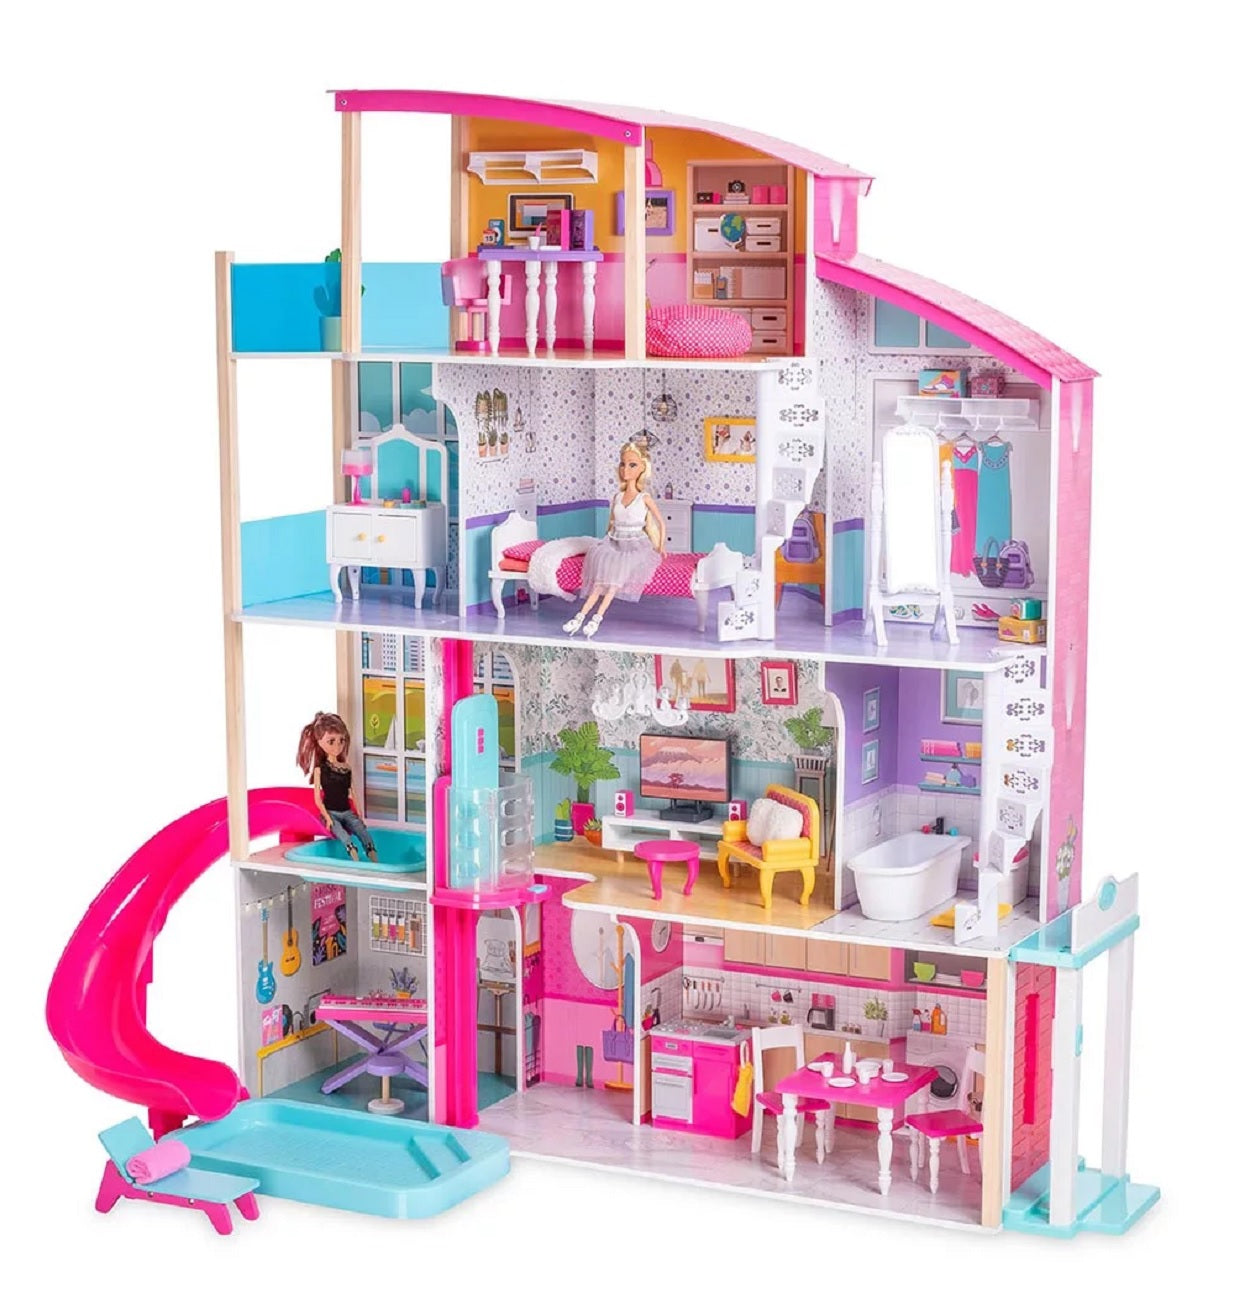 Member's Mark Beachside Dollhouse with 65 Accessories Included